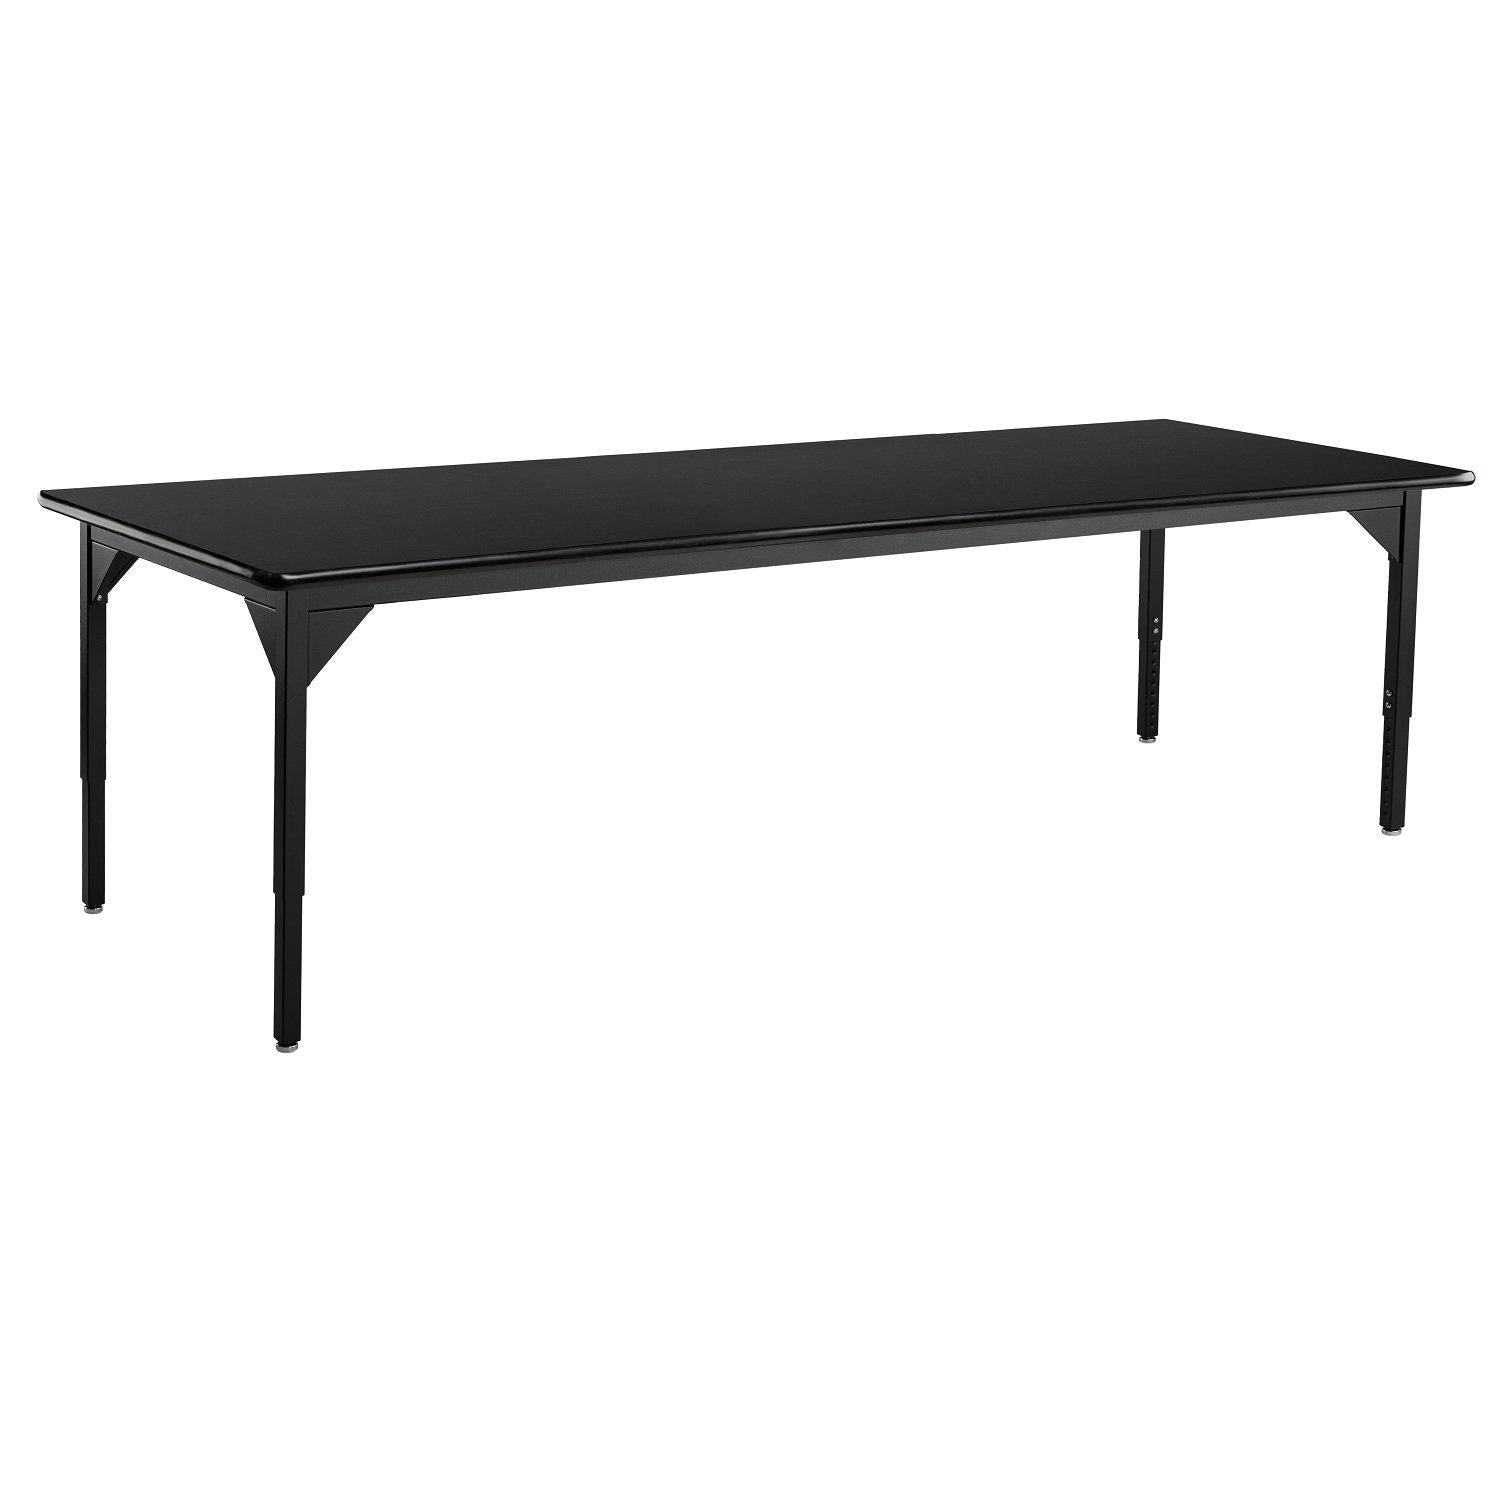 Heavy-Duty Height-Adjustable Utility Table, Black Frame, 48" x 72", High-Pressure Laminate Top with T-Mold Edge